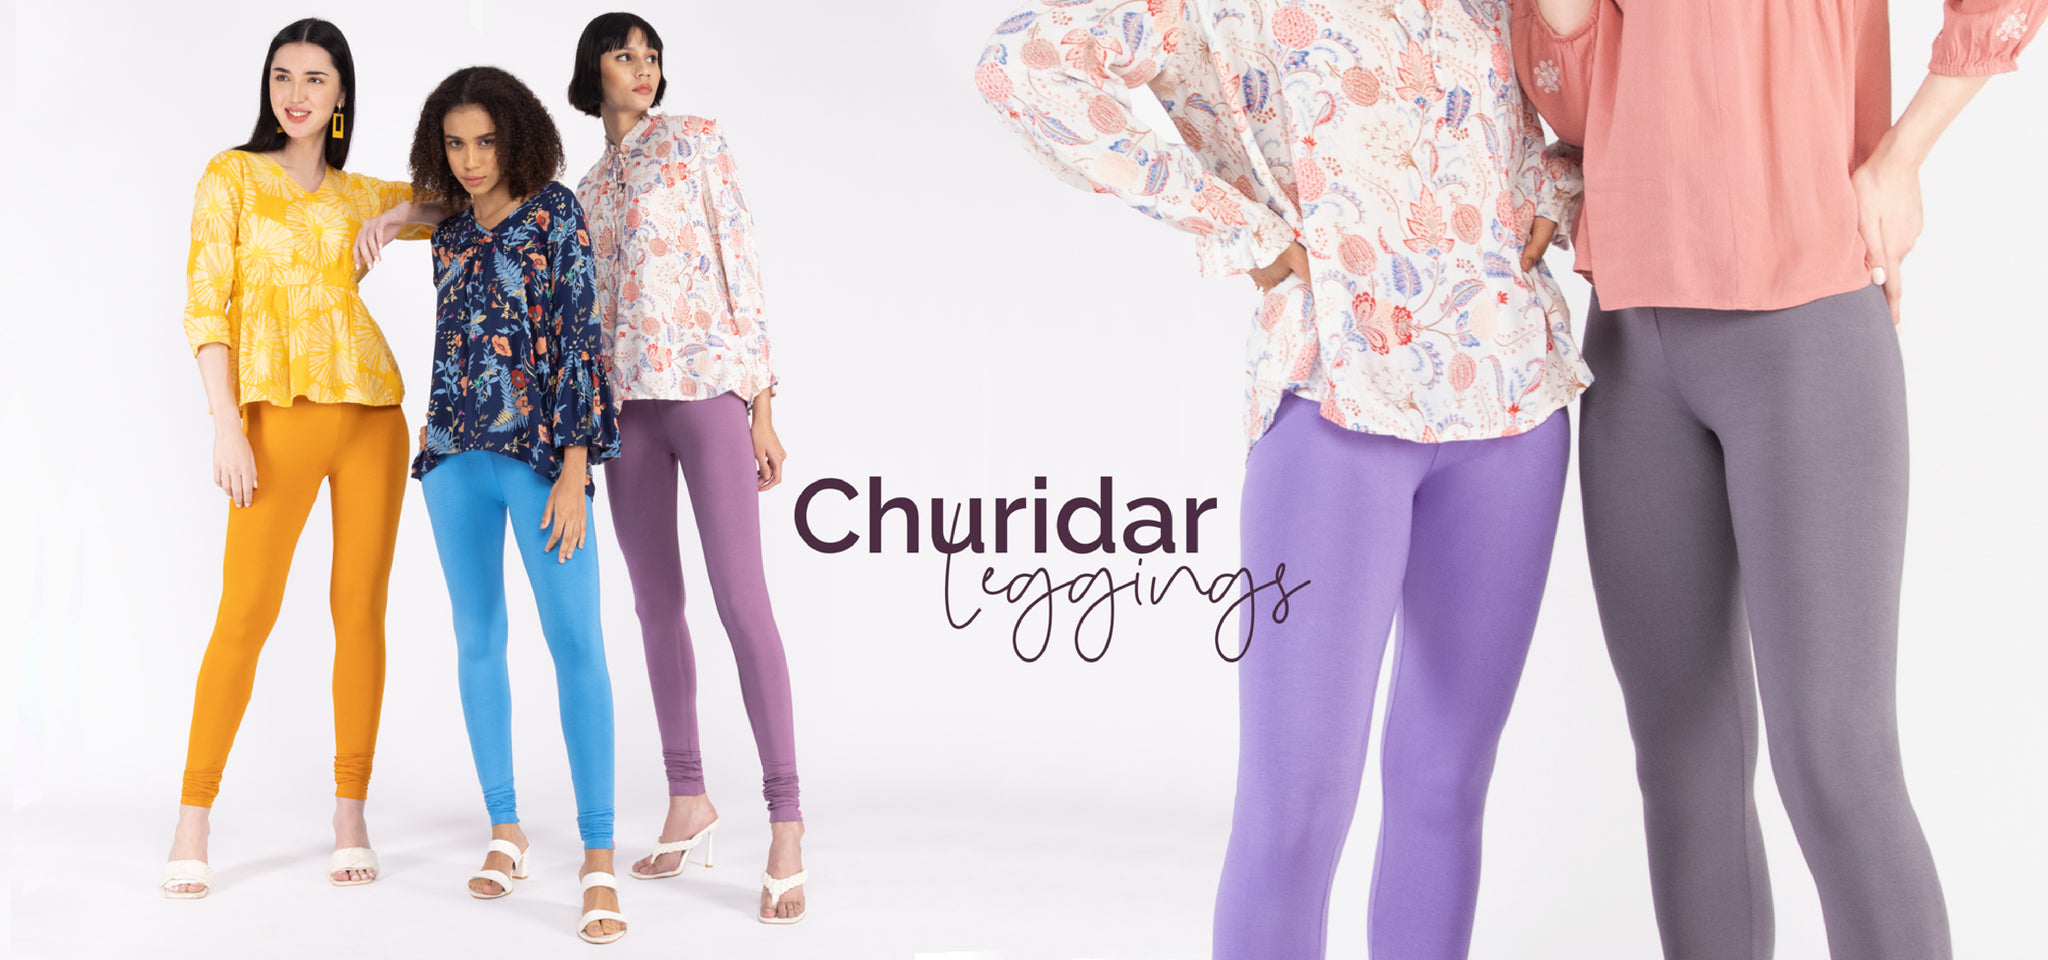 How to Care for Your Churidar Leggings: Tips to Keep Them Looking New